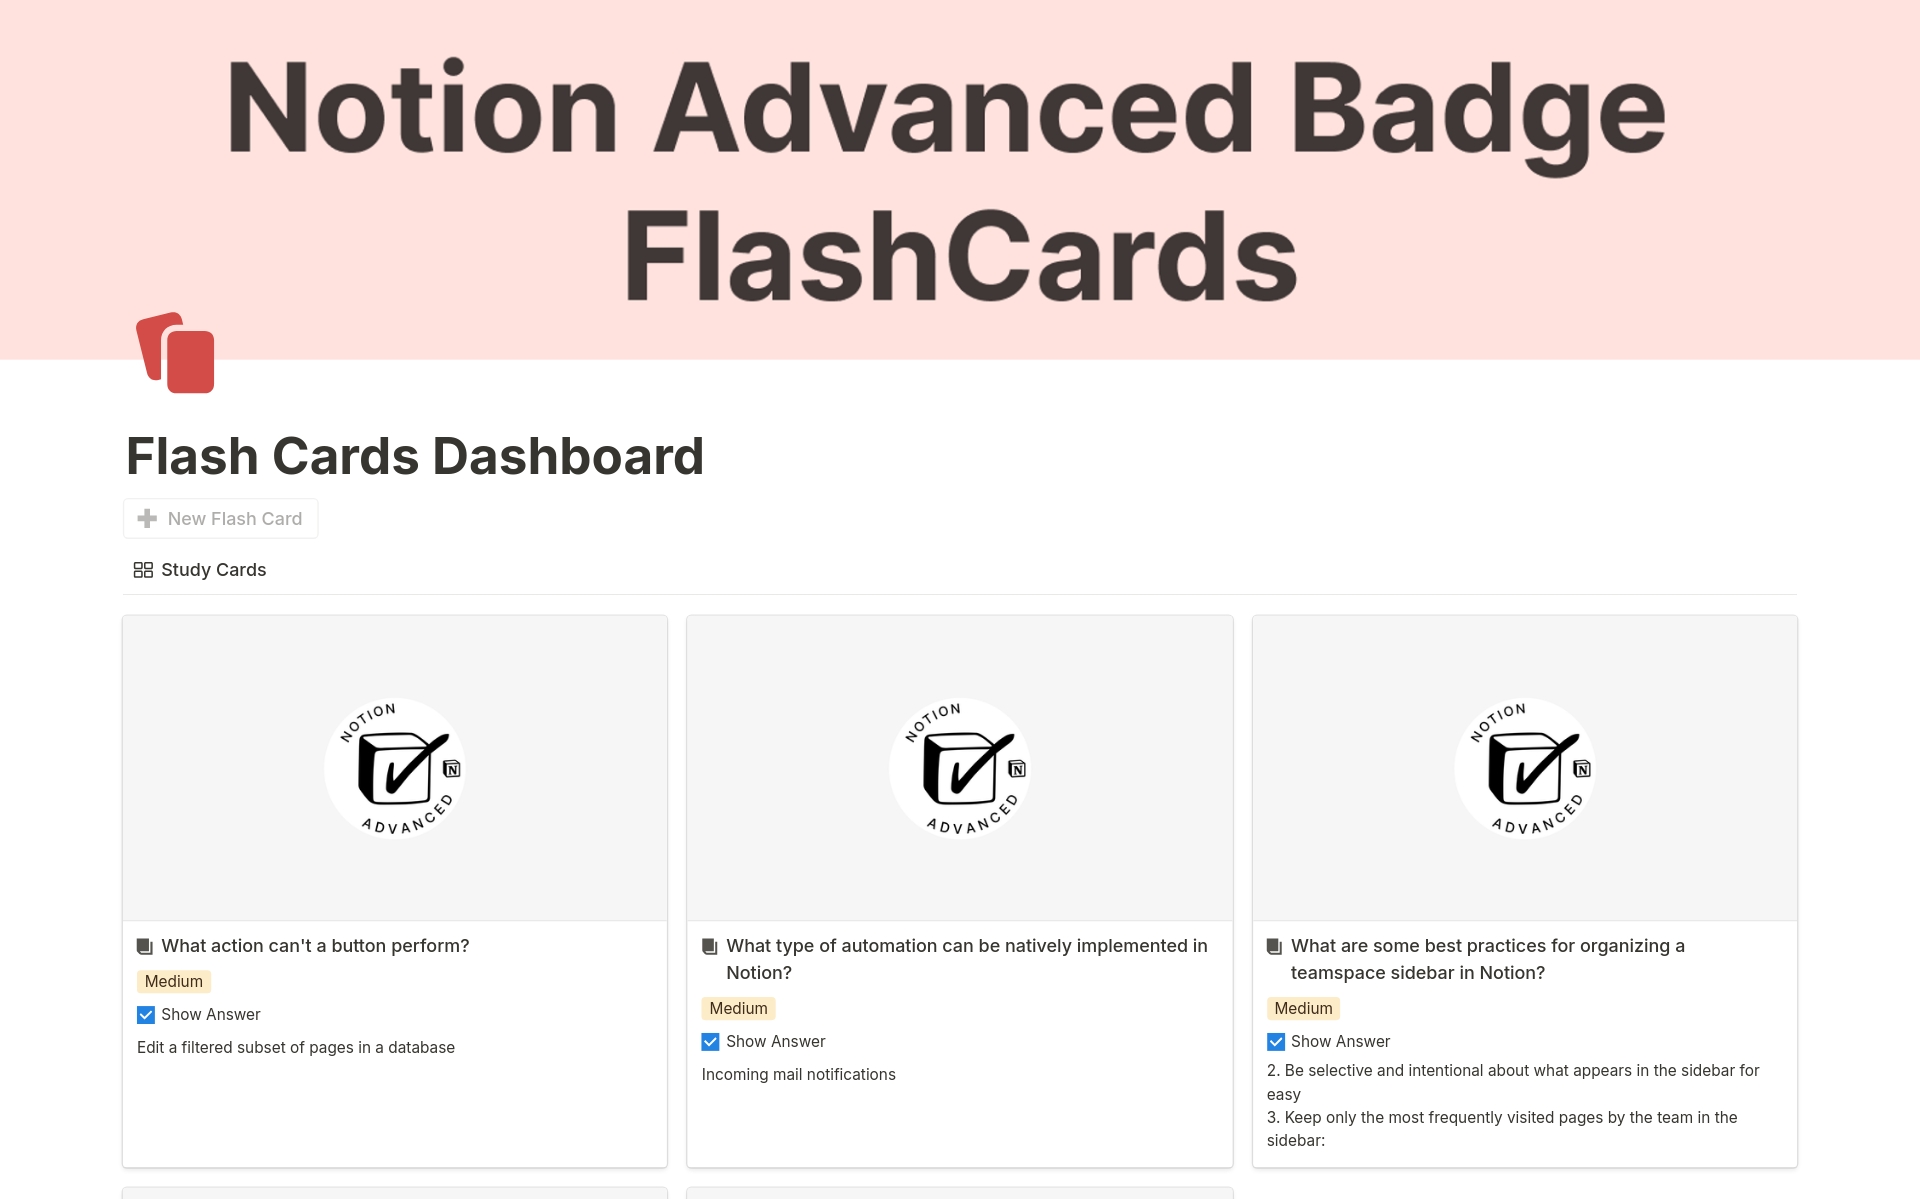 FREE Notion Advanced Badge Flashcards: Conquer the Exam

Unlock the full power of Notion and snag the coveted Notion Advanced Badge with FREE flashcard study guide!

This comprehensive deck, meticulously crafted by Notion experts.